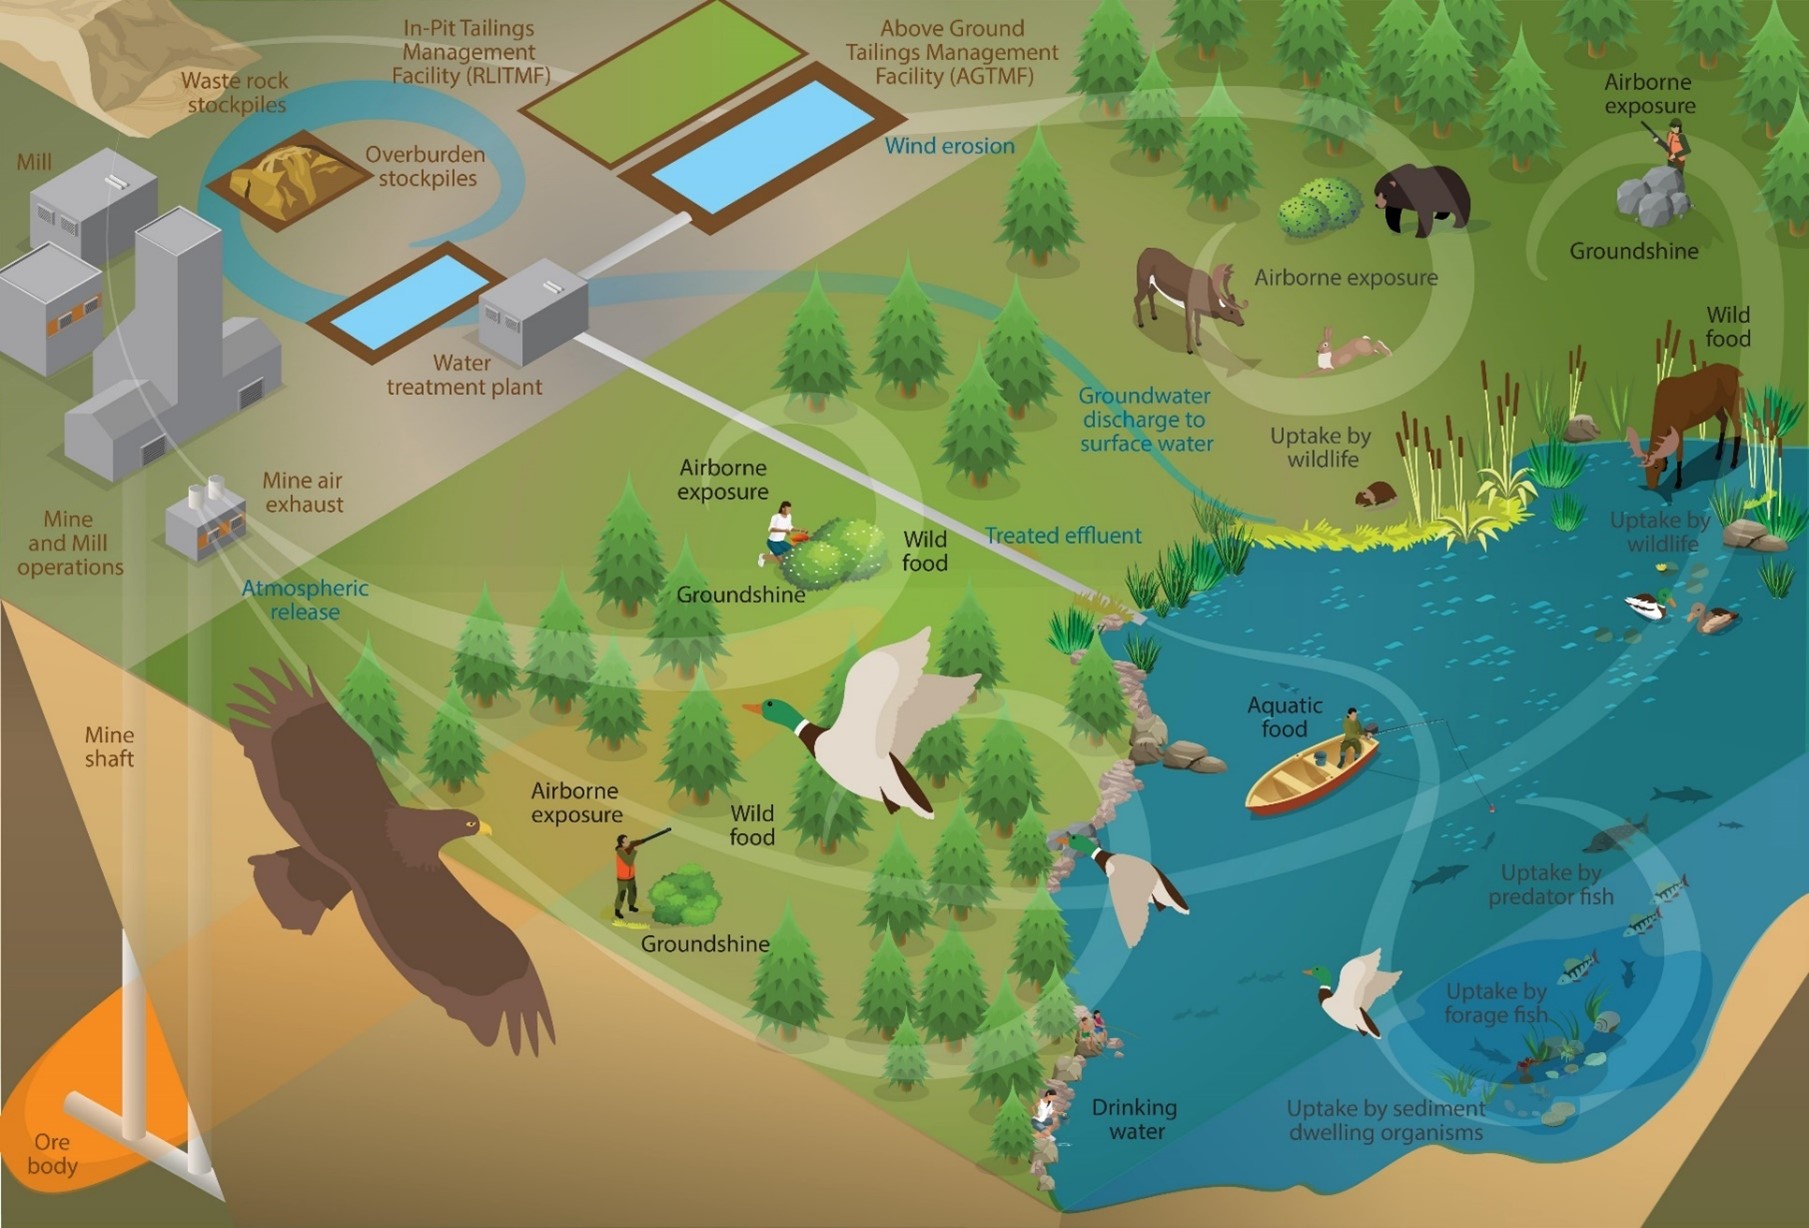 Conceptual exposure pathways for atmospheric and aquatic releases to the environment from the Key Lake Operation.